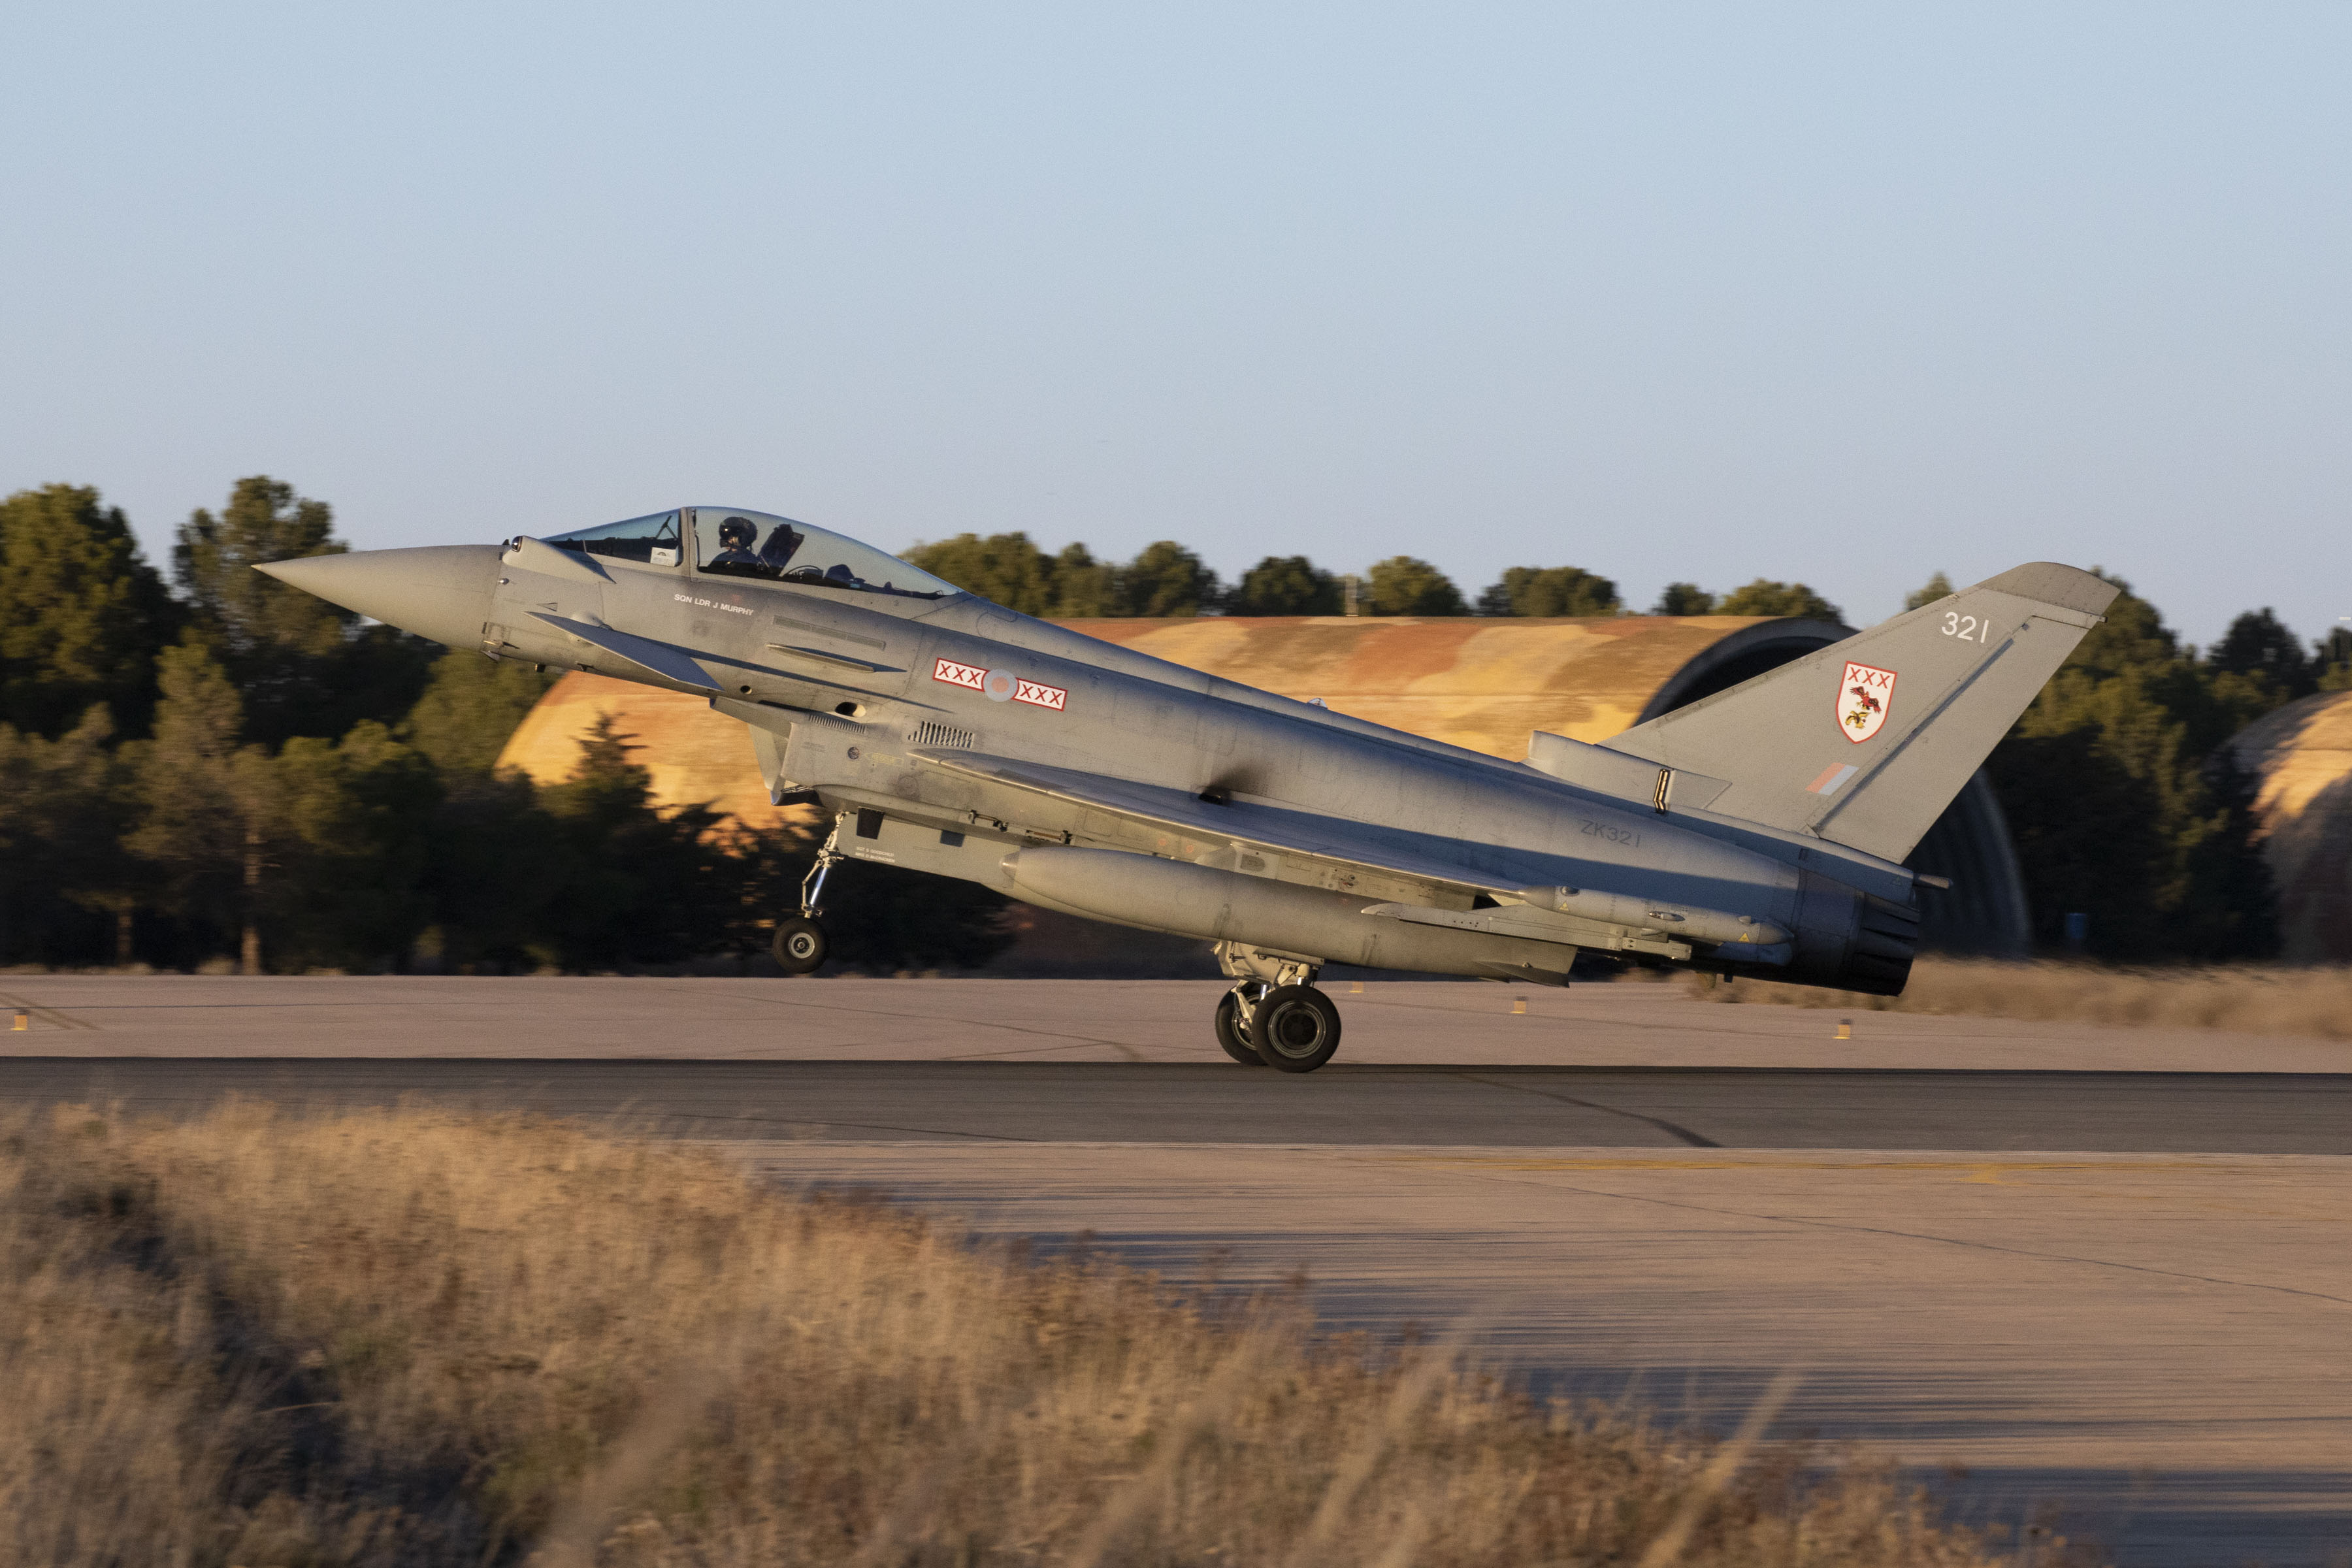 Typhoon aircraft taking off in Spain